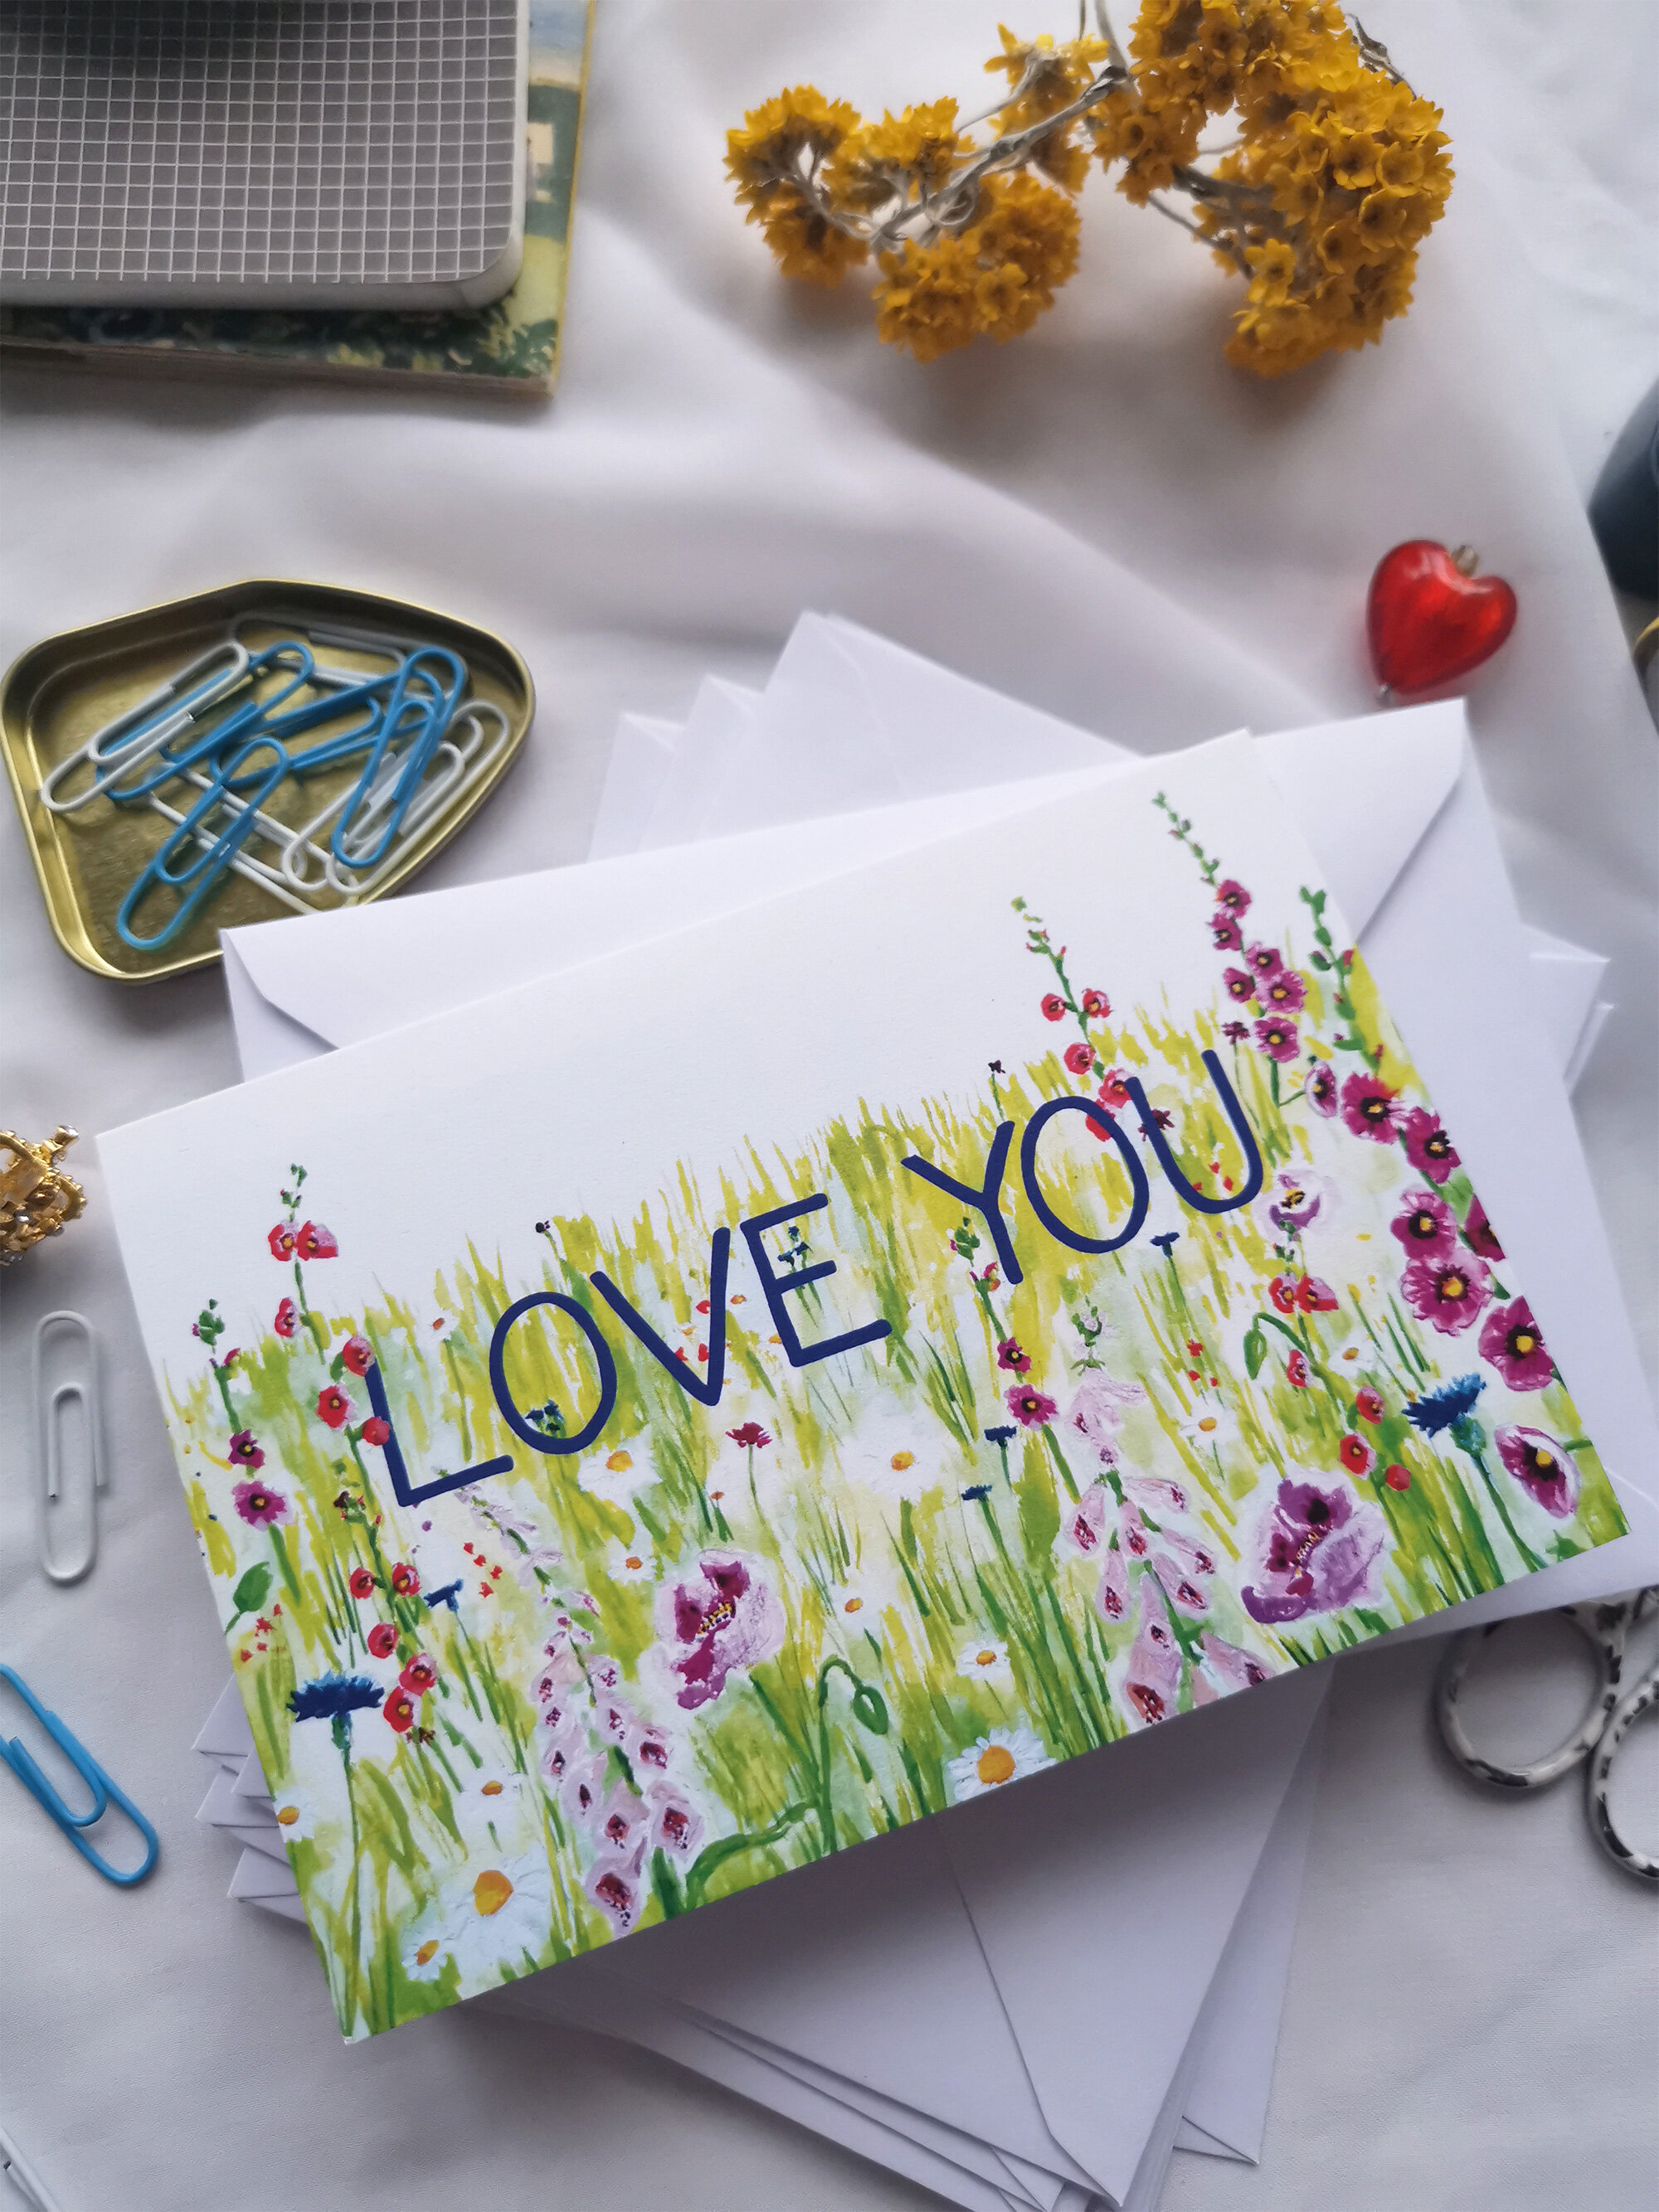 LOVE-YOU-MEADOW-GREETINGS-CARD-WEBB-AND-FARRER-ETSY-SHOP5-1.jpg